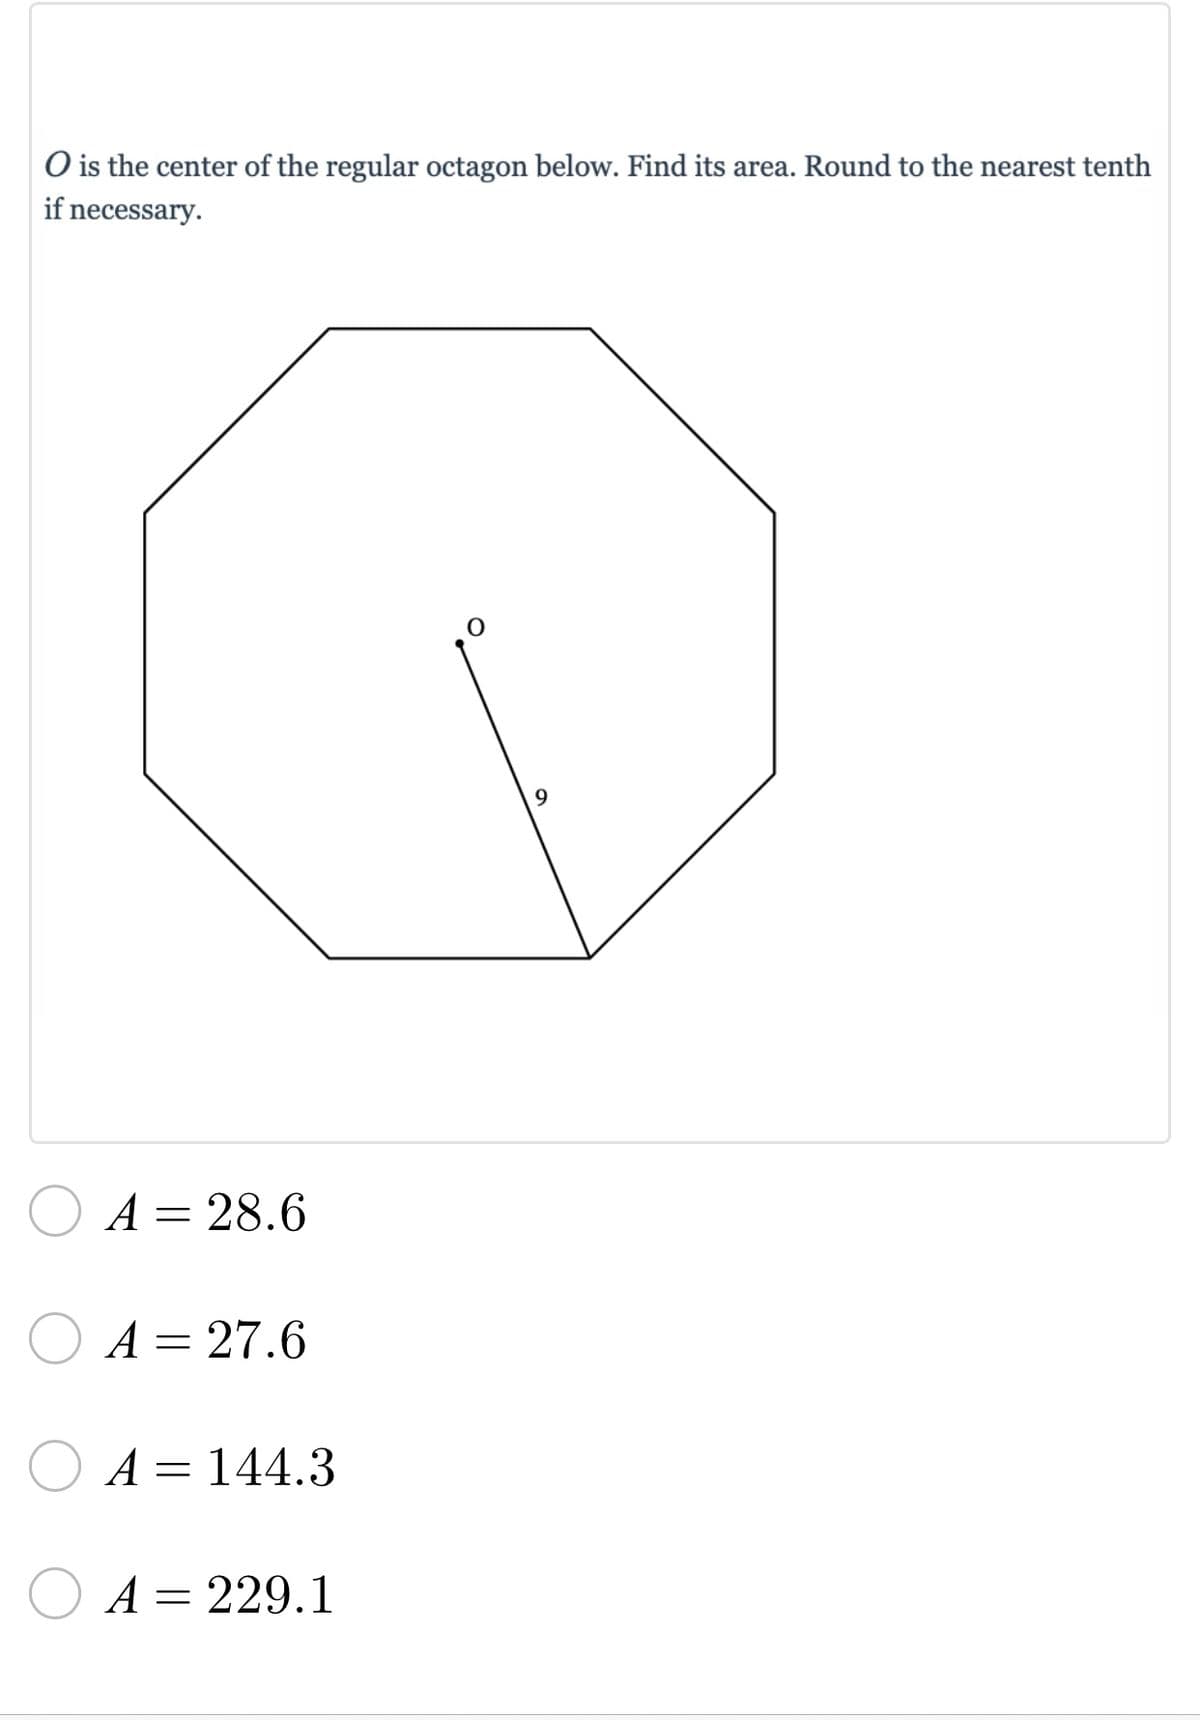 ### Problem Statement

**\( O \) is the center of the regular octagon below. Find its area. Round to the nearest tenth if necessary.**

**Diagram Description:** 
The diagram depicts a regular octagon with its center marked as \( O \). A line segment extends from the center \( O \) to one of the vertices of the octagon, measuring 9 units in length.

### Multiple Choice Options:
- \( \bigcirc \) \( A = 28.6 \)
- \( \bigcirc \) \( A = 27.6 \)
- \( \bigcirc \) \( A = 144.3 \)
- \( \bigcirc \) \( A = 229.1 \)